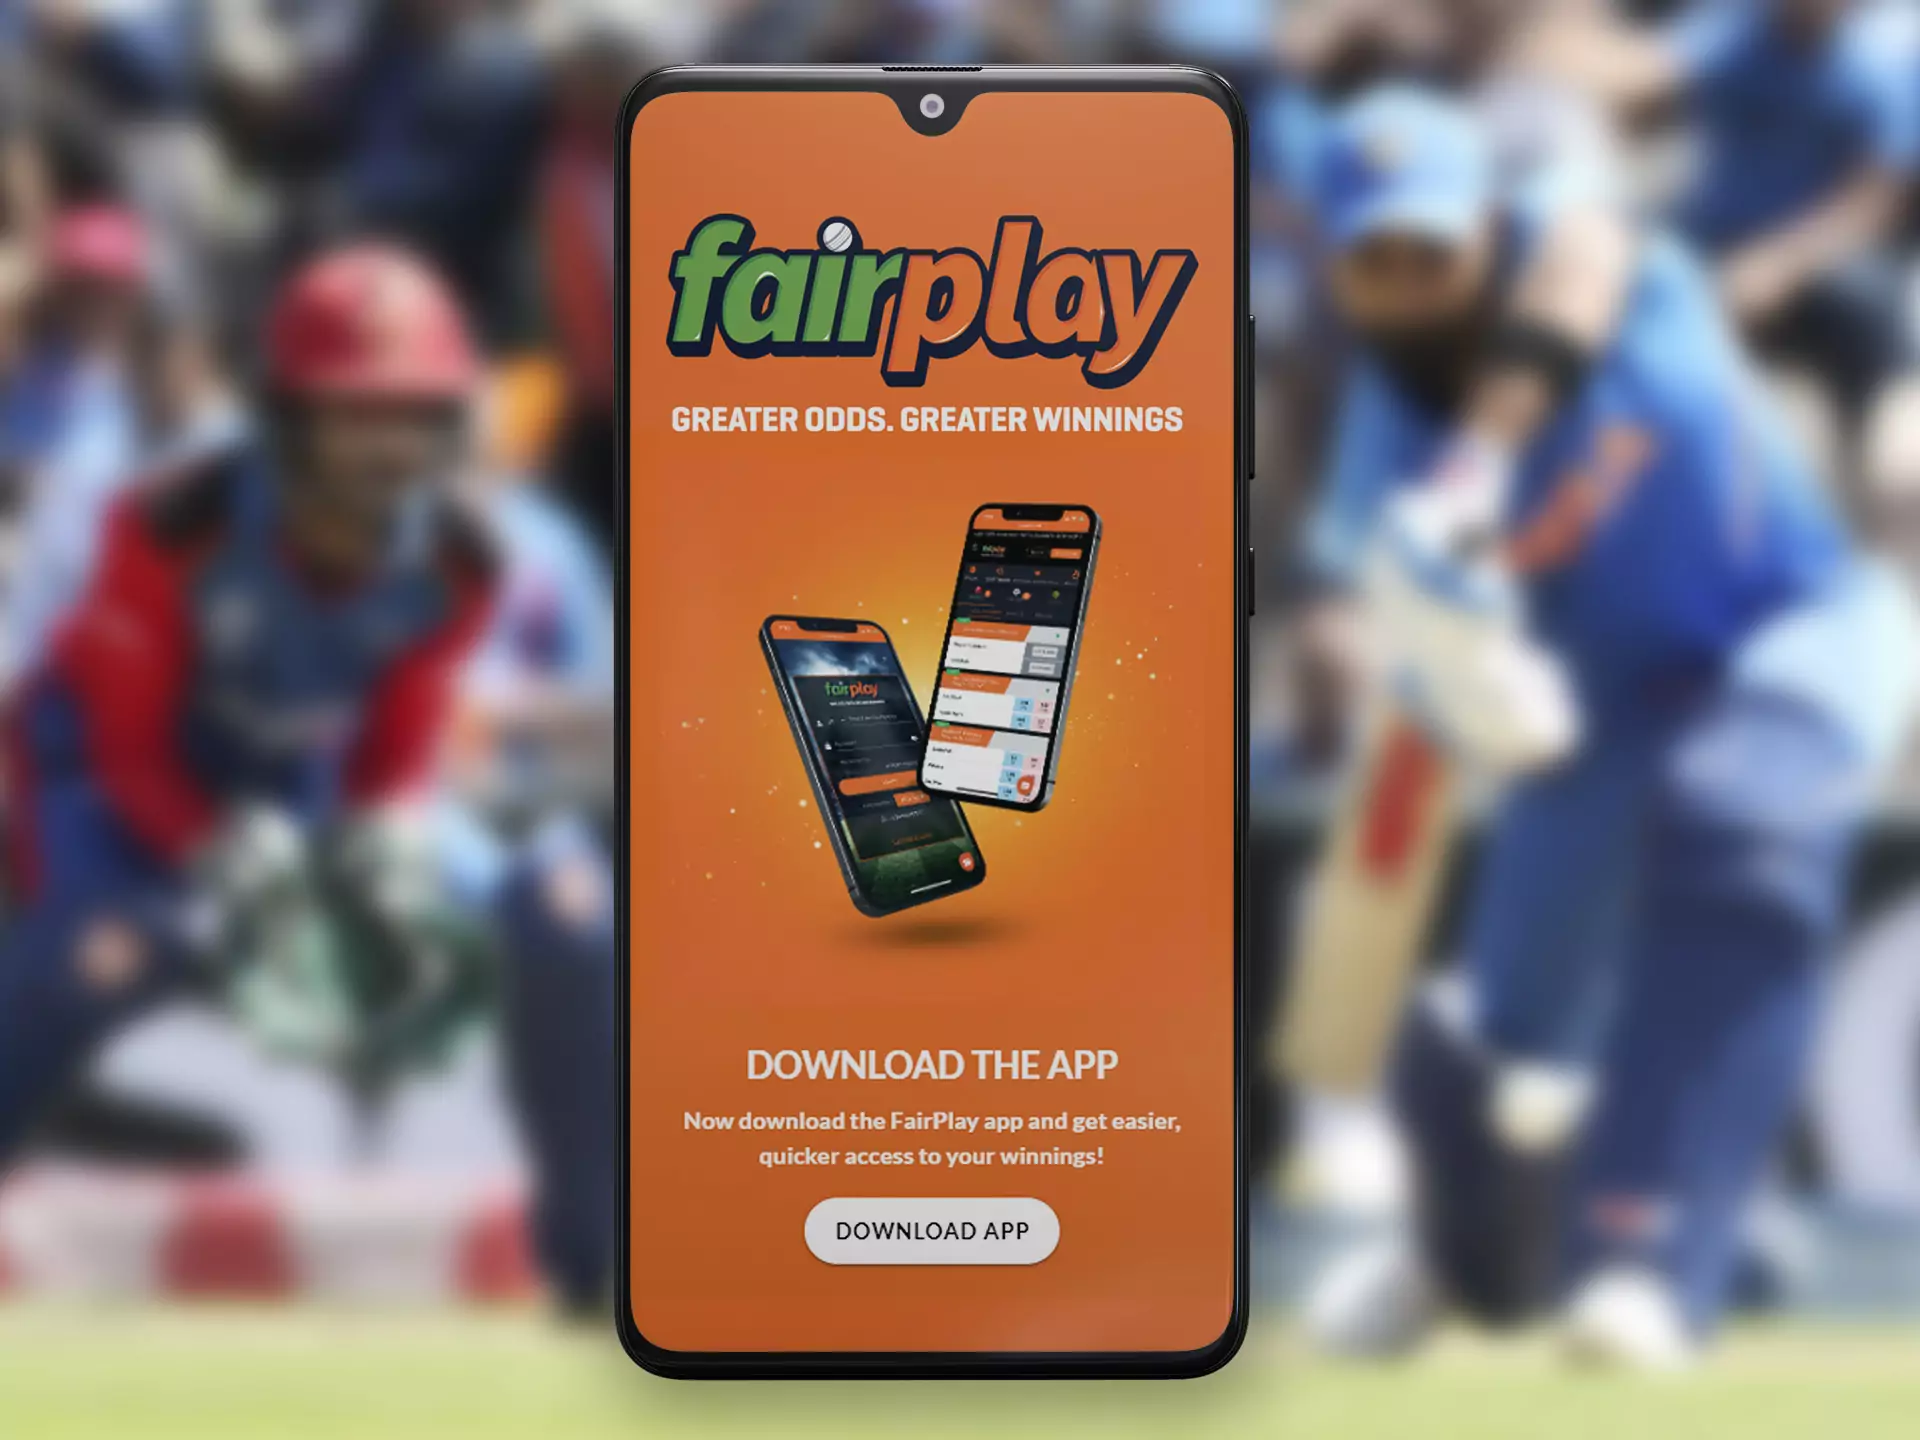 The official Fairplay app is available for Android.